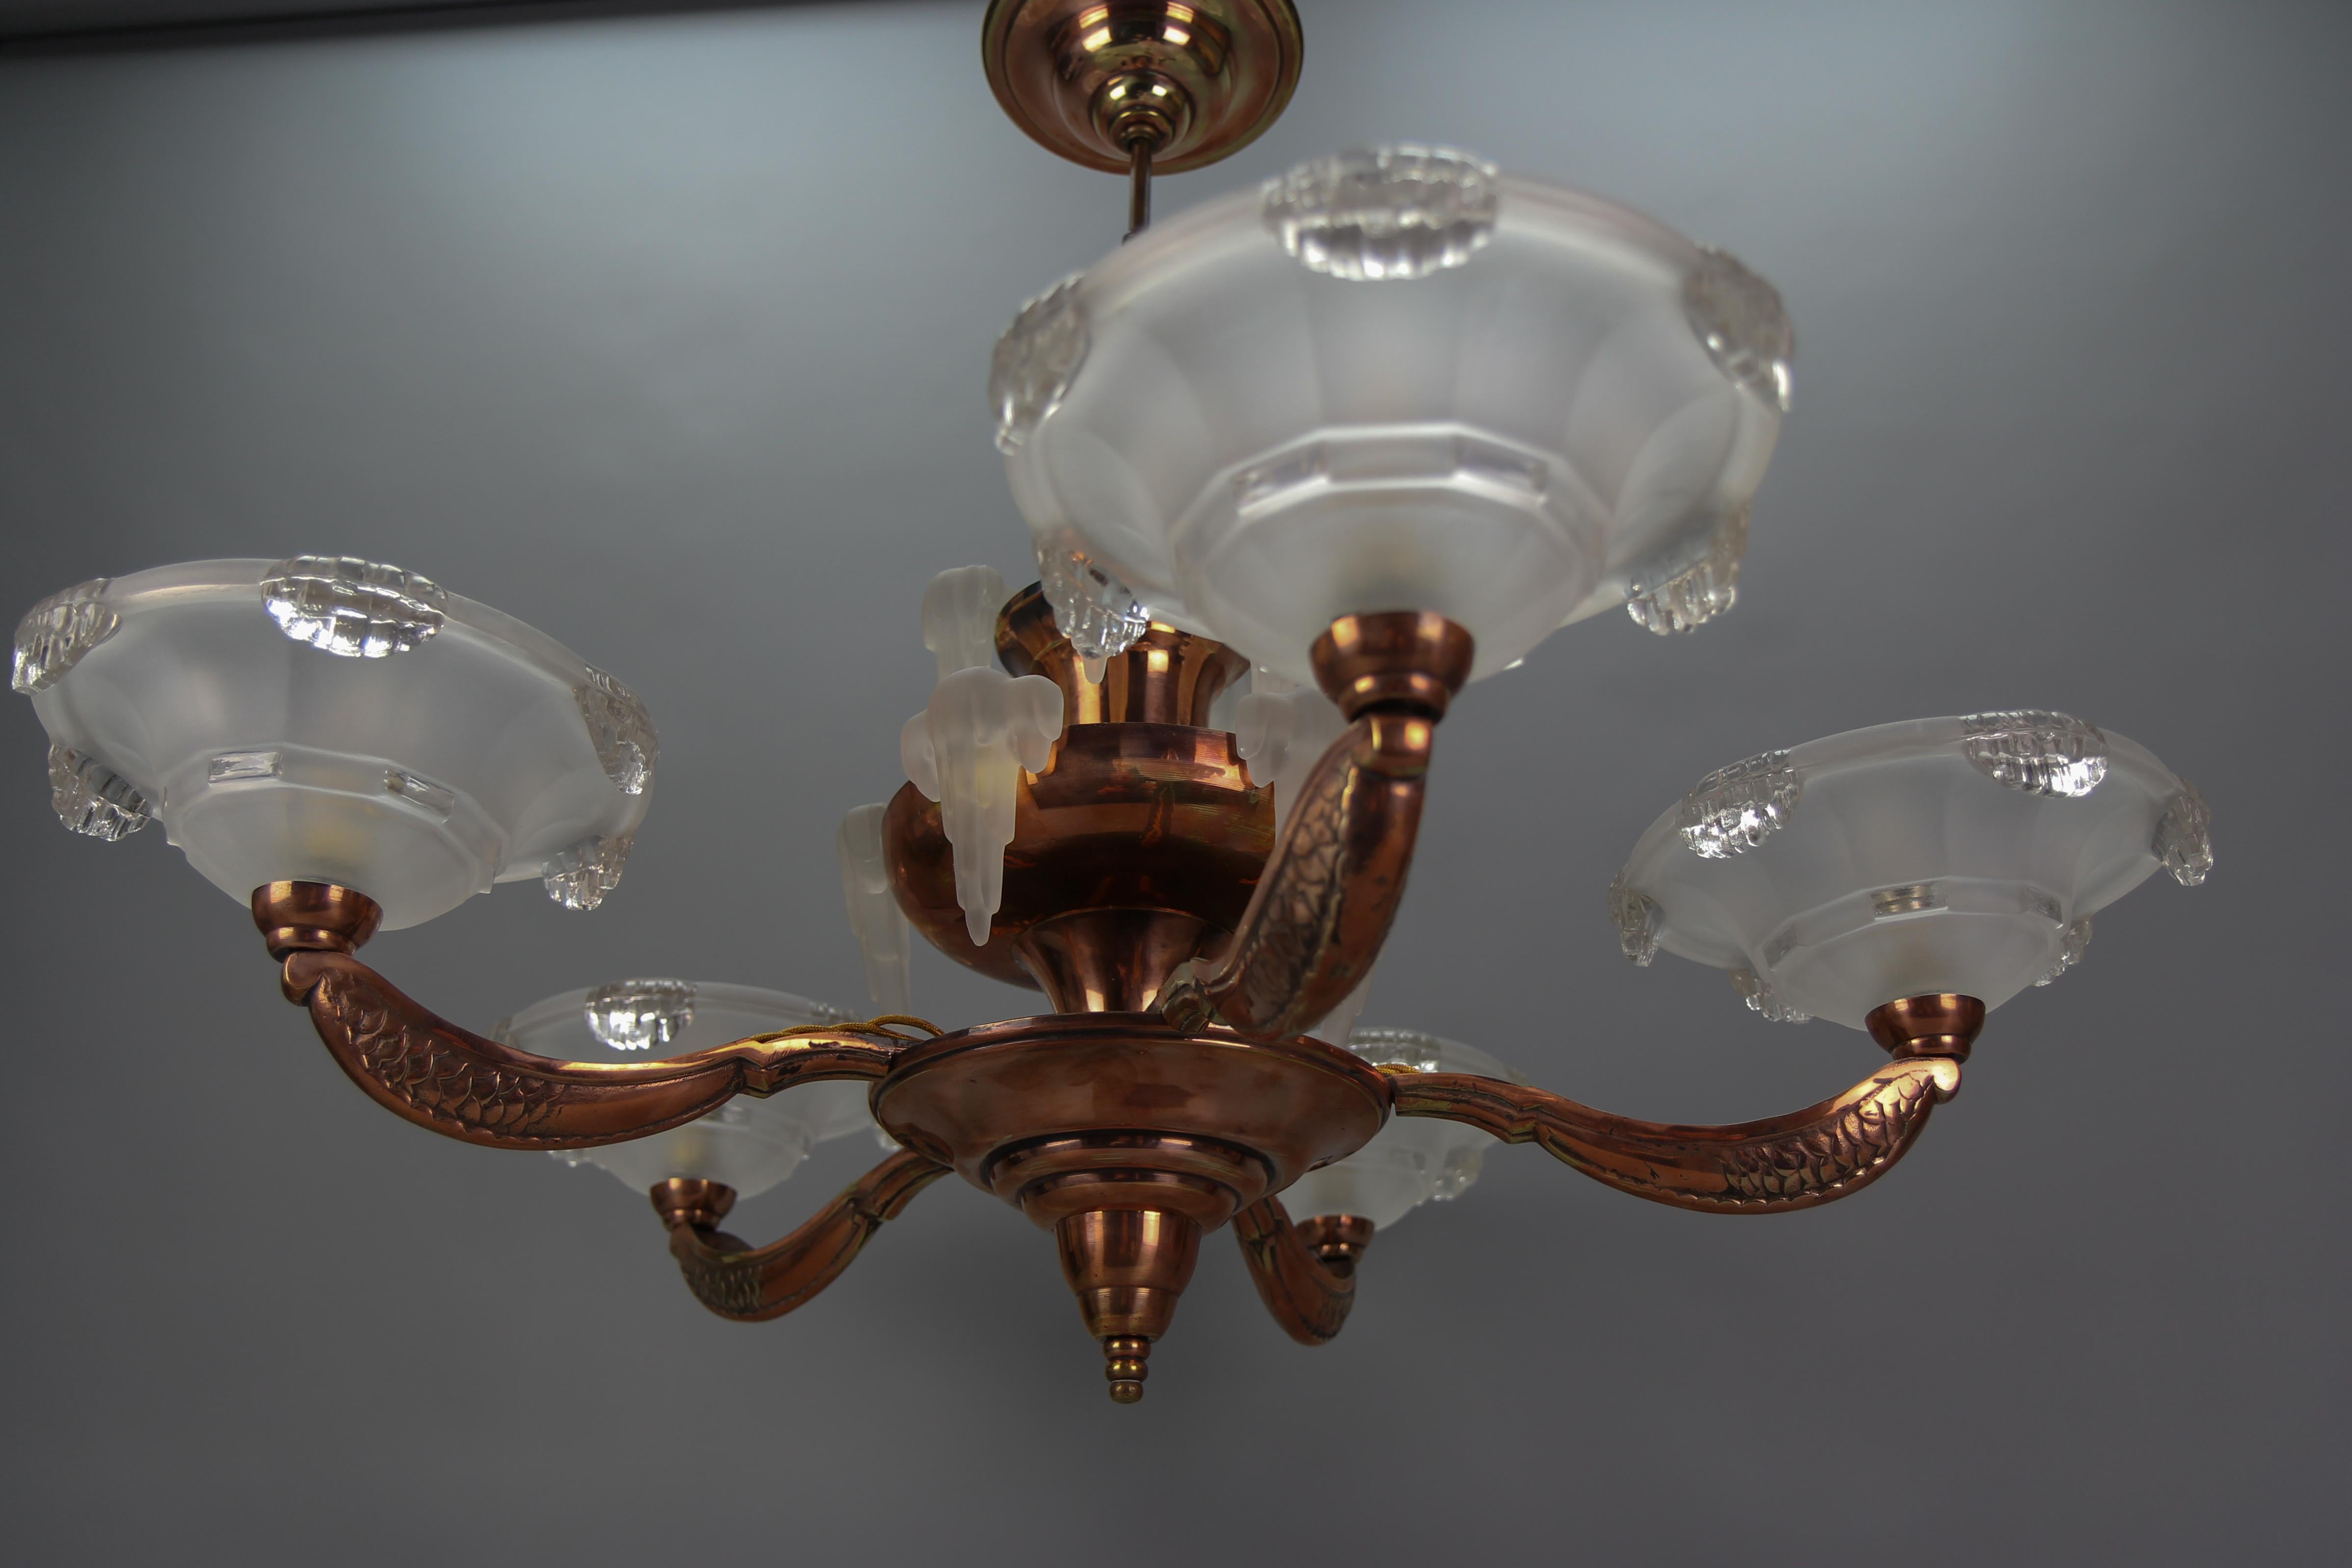 French Art Deco 7-Light Frosted Glass, Brass and Copper Chandelier, 1930s For Sale 2